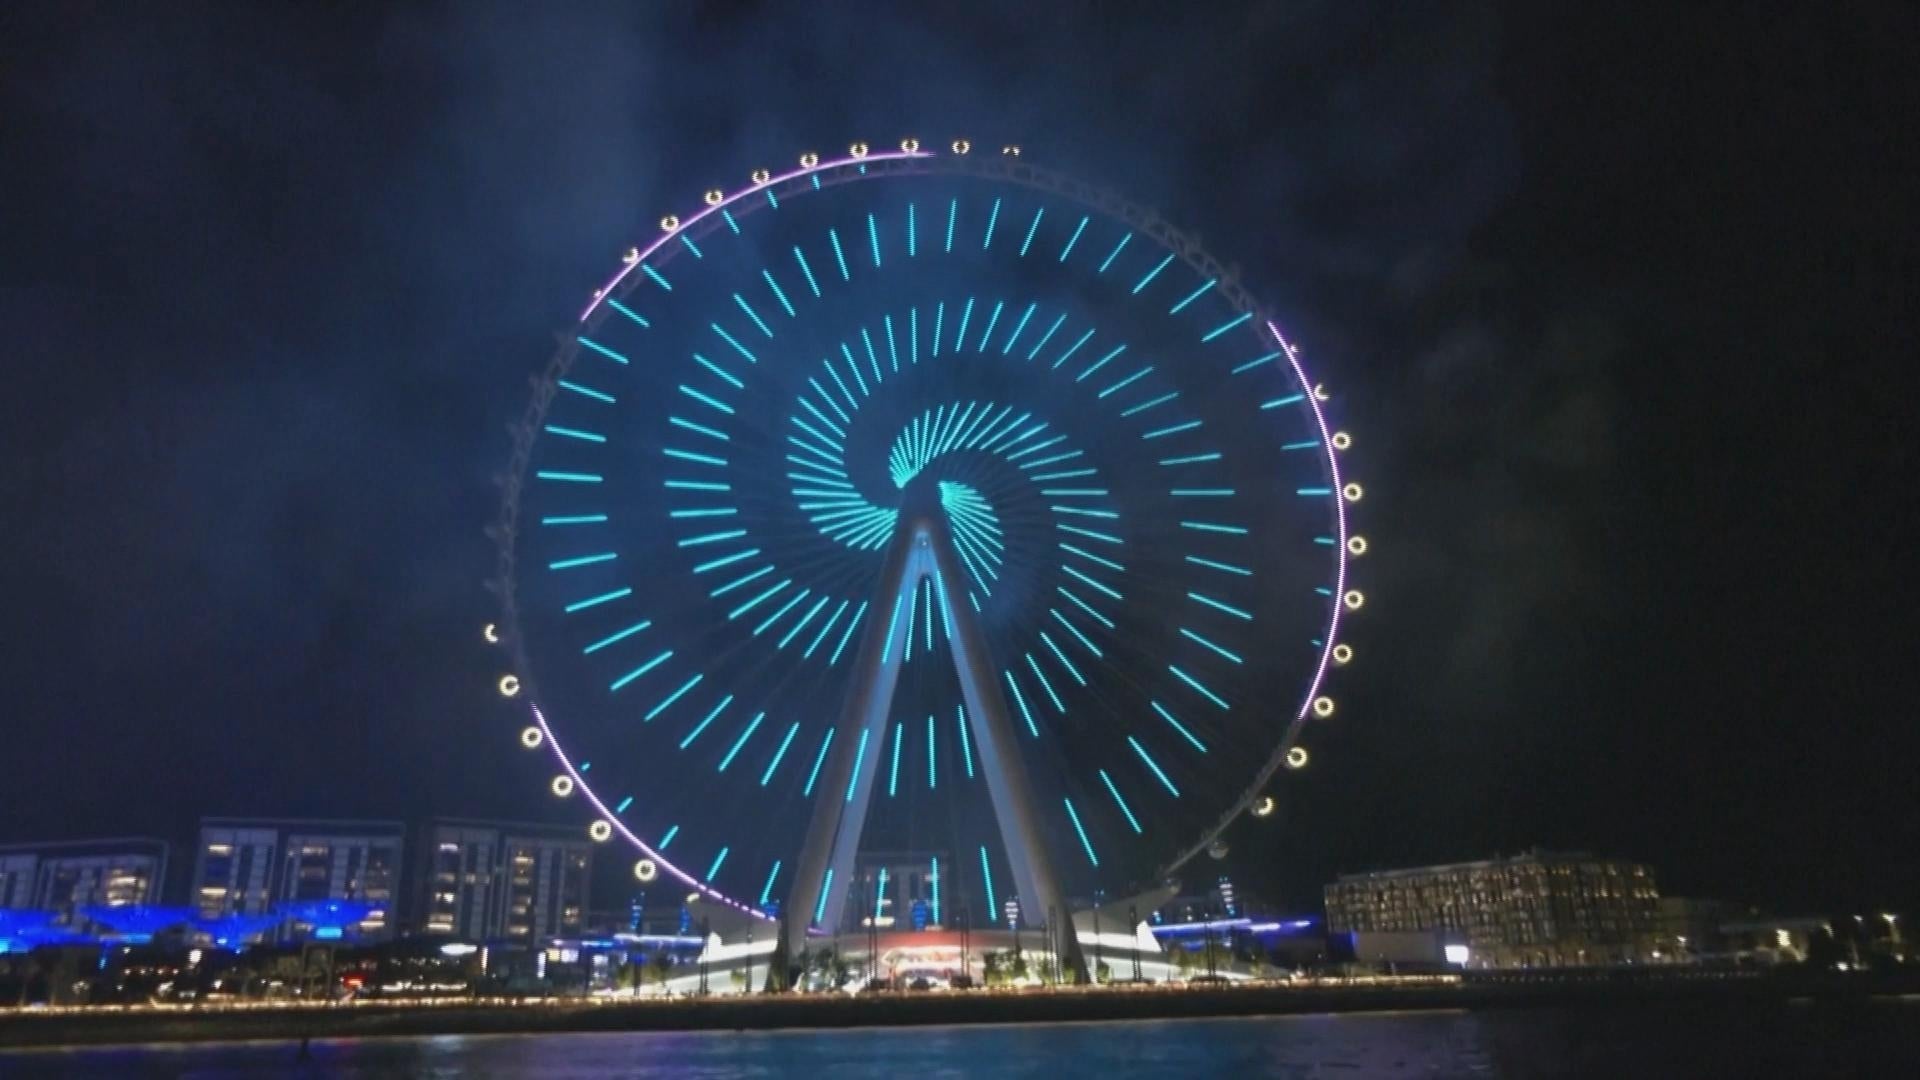 Tallest Ferris Wheel in the World Takes 38 Minutes to Ride